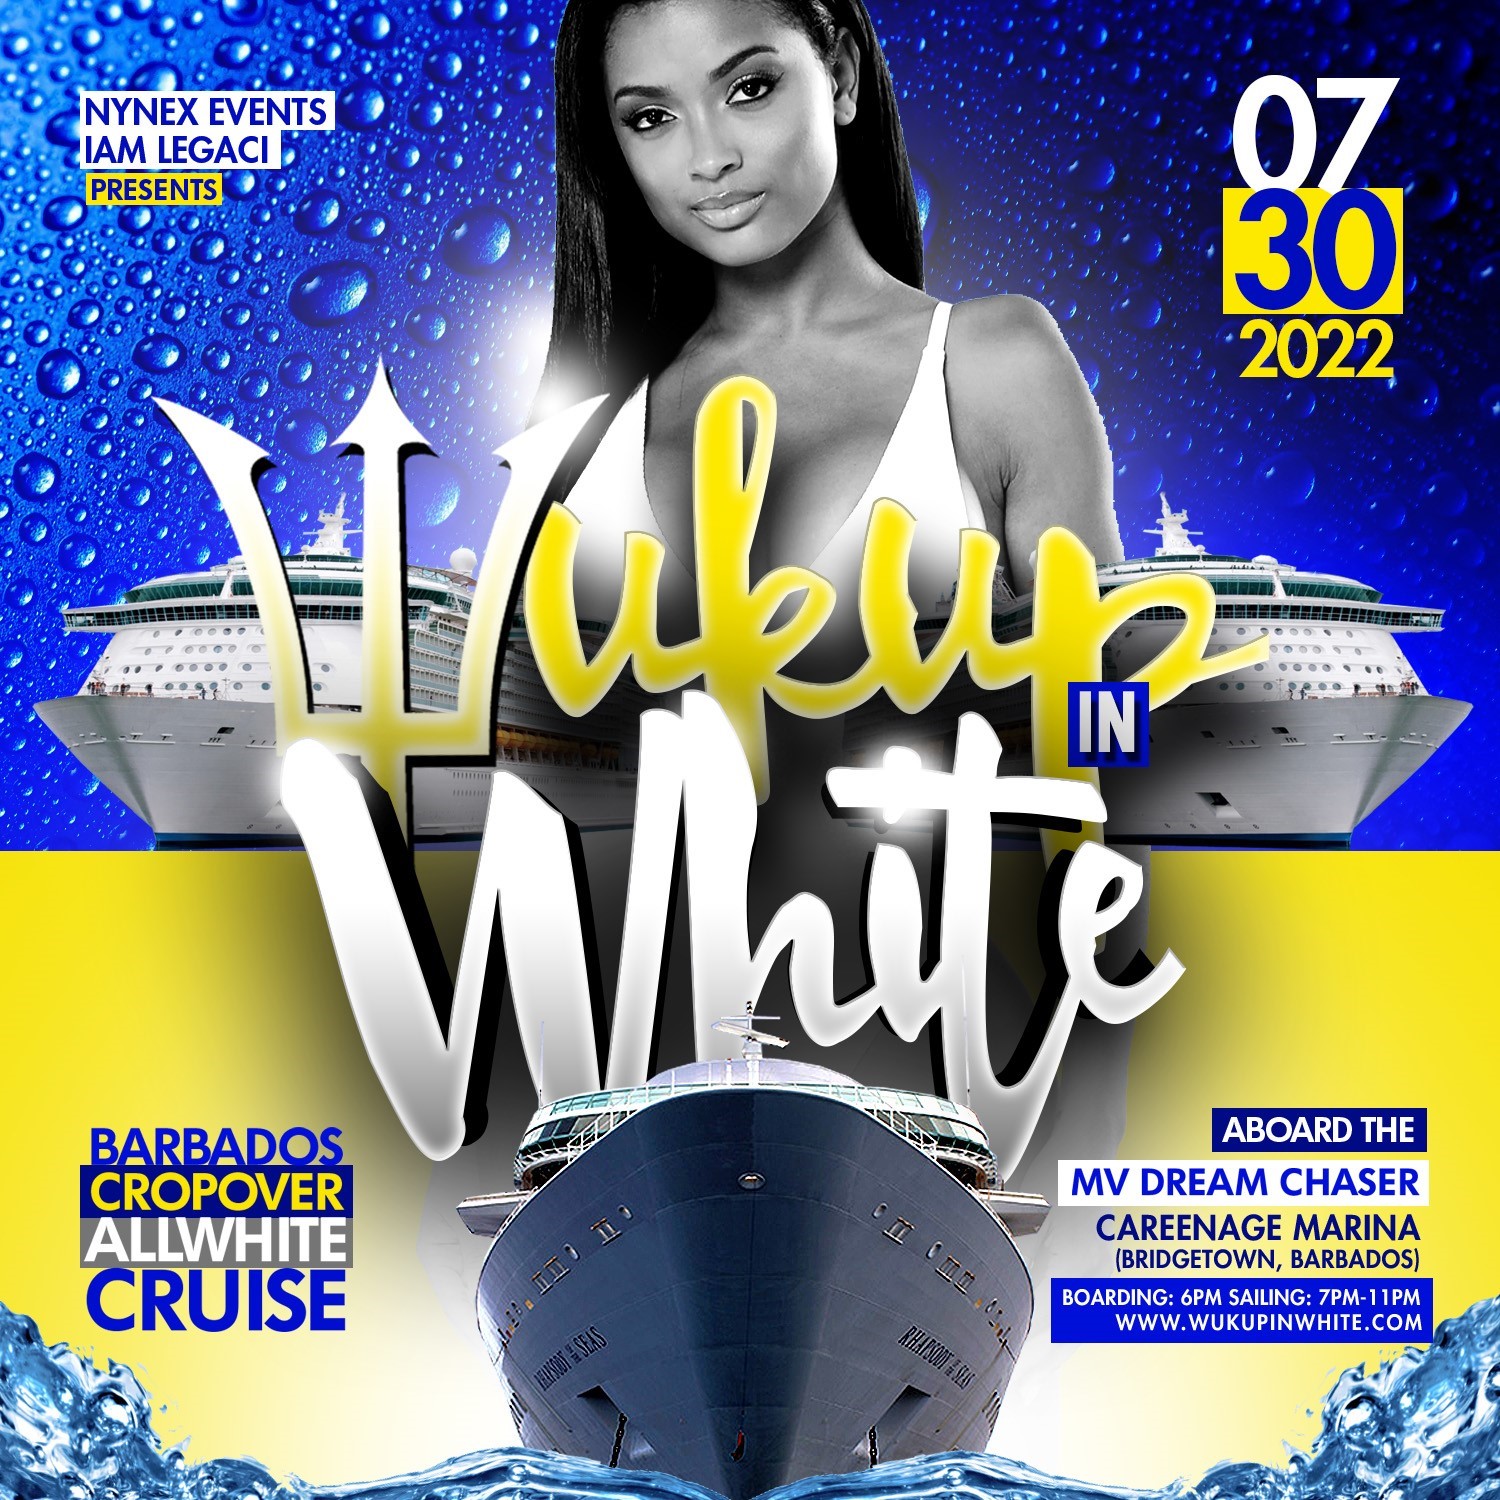 WUK UP IN WHITE The Annual All White Boat Ride · Barbados Crop Over 2022  on Jul 30, 18:00@MV Dream Chaser - Buy tickets and Get information on www.fetefinders.com tickets.fetefinders.com